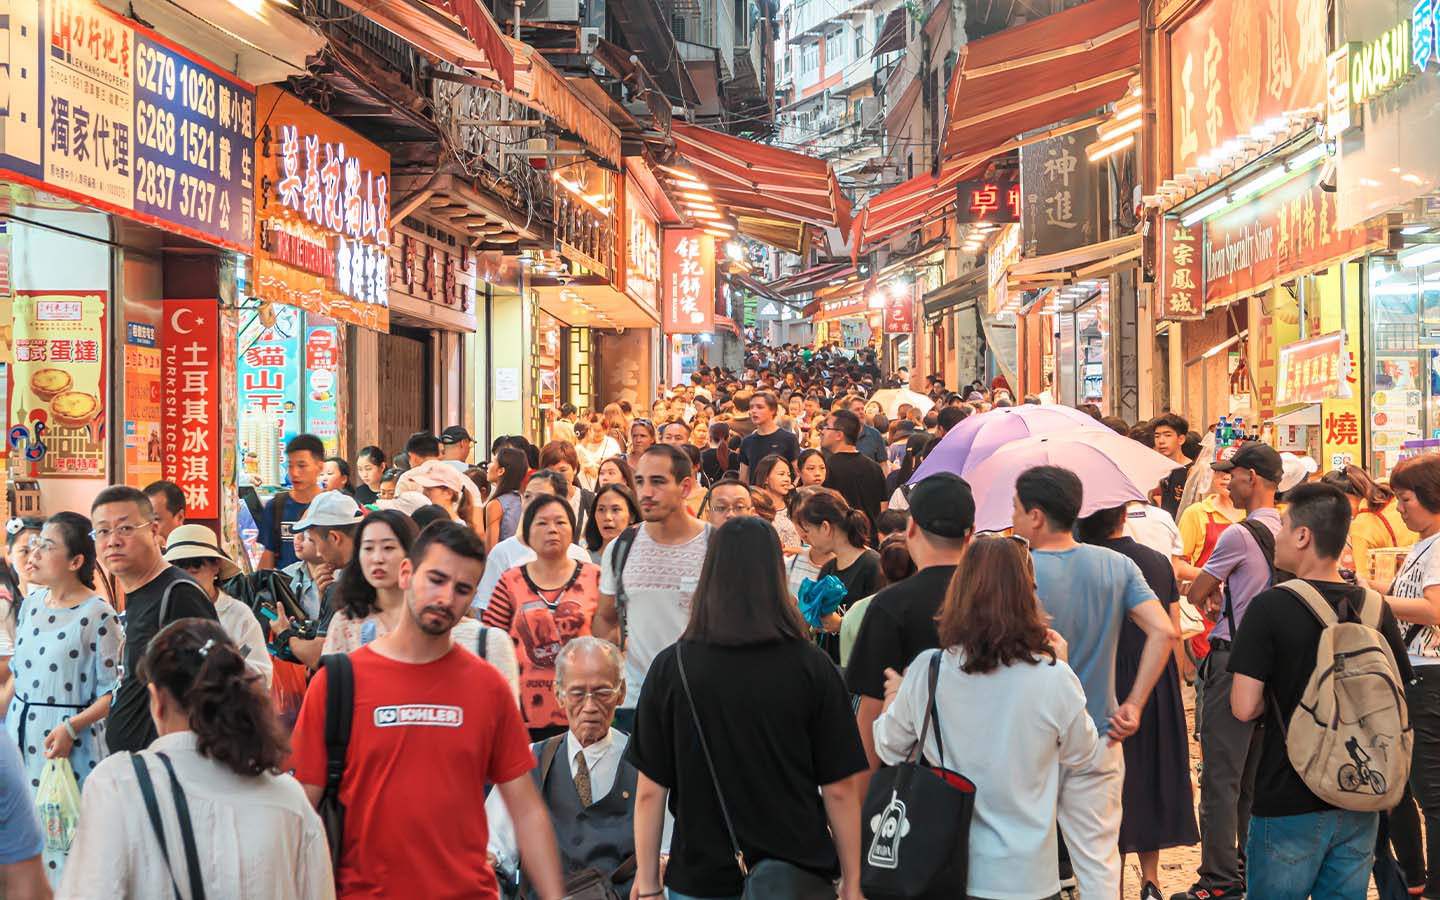 A lot more foreigners are visiting Macao on package tours